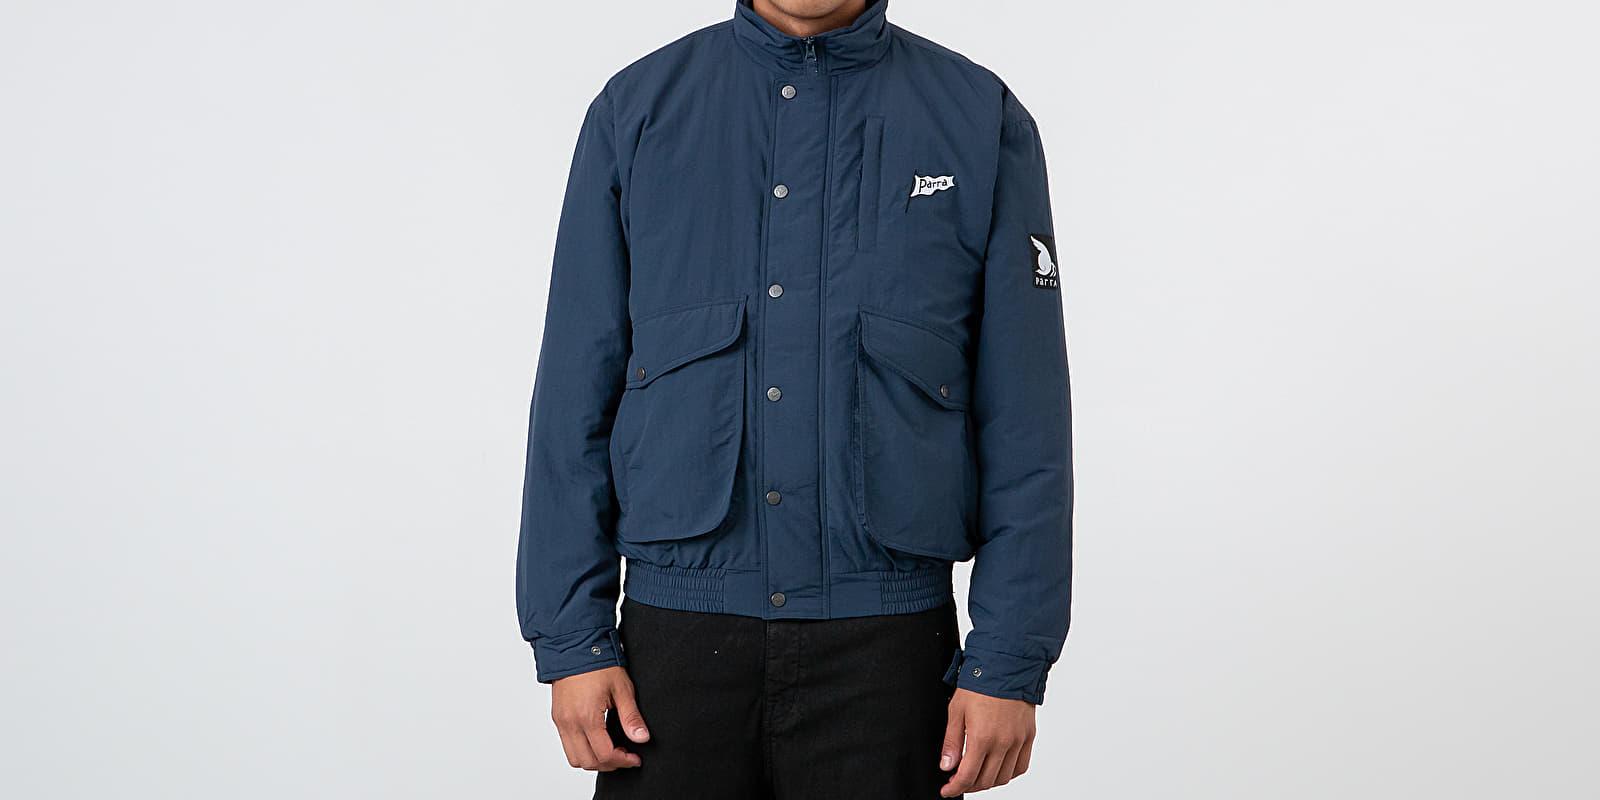 by Parra Synthetic 1995 Nylon Jacket Navy Blue for Men - Lyst